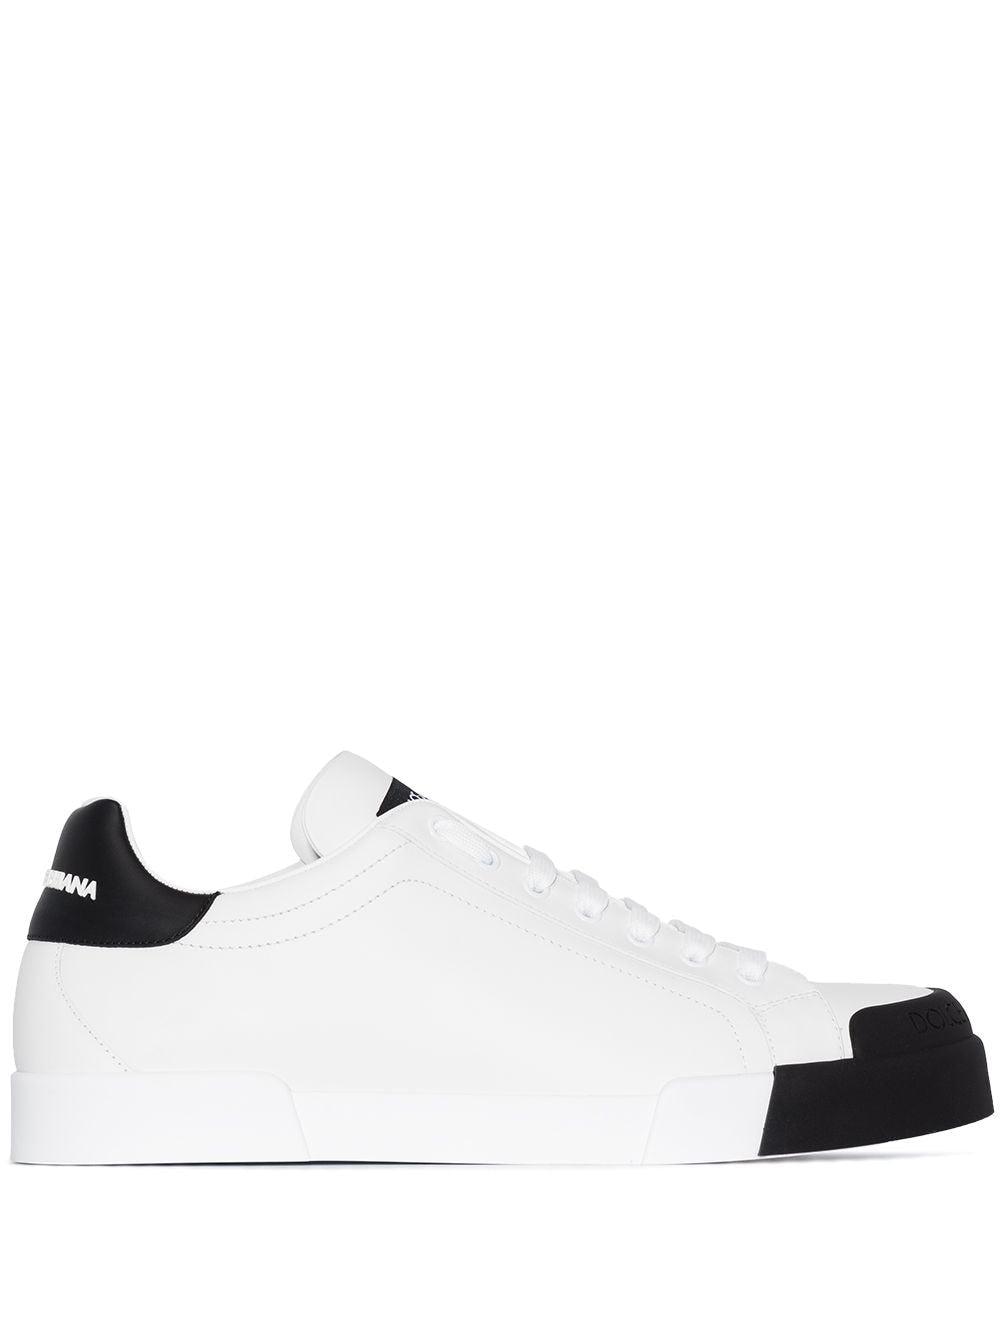 Dolce & Gabbana Leather Sneakers White for Men - Lyst